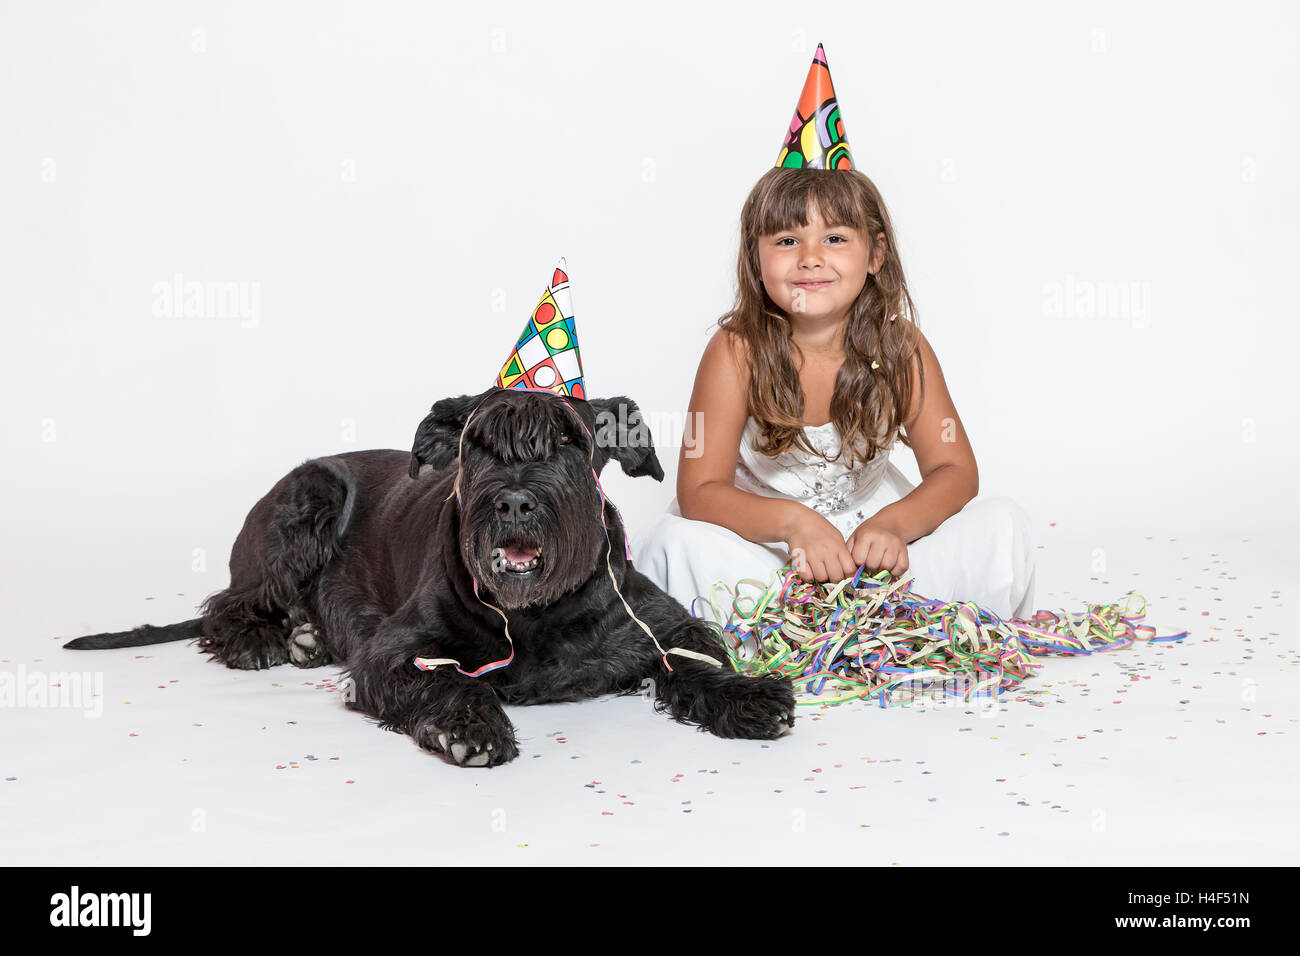 Cute smiling tanned little girl in white dress with paper hat on her head is sitting with lying Giant Black Schnauzer dog Stock Photo